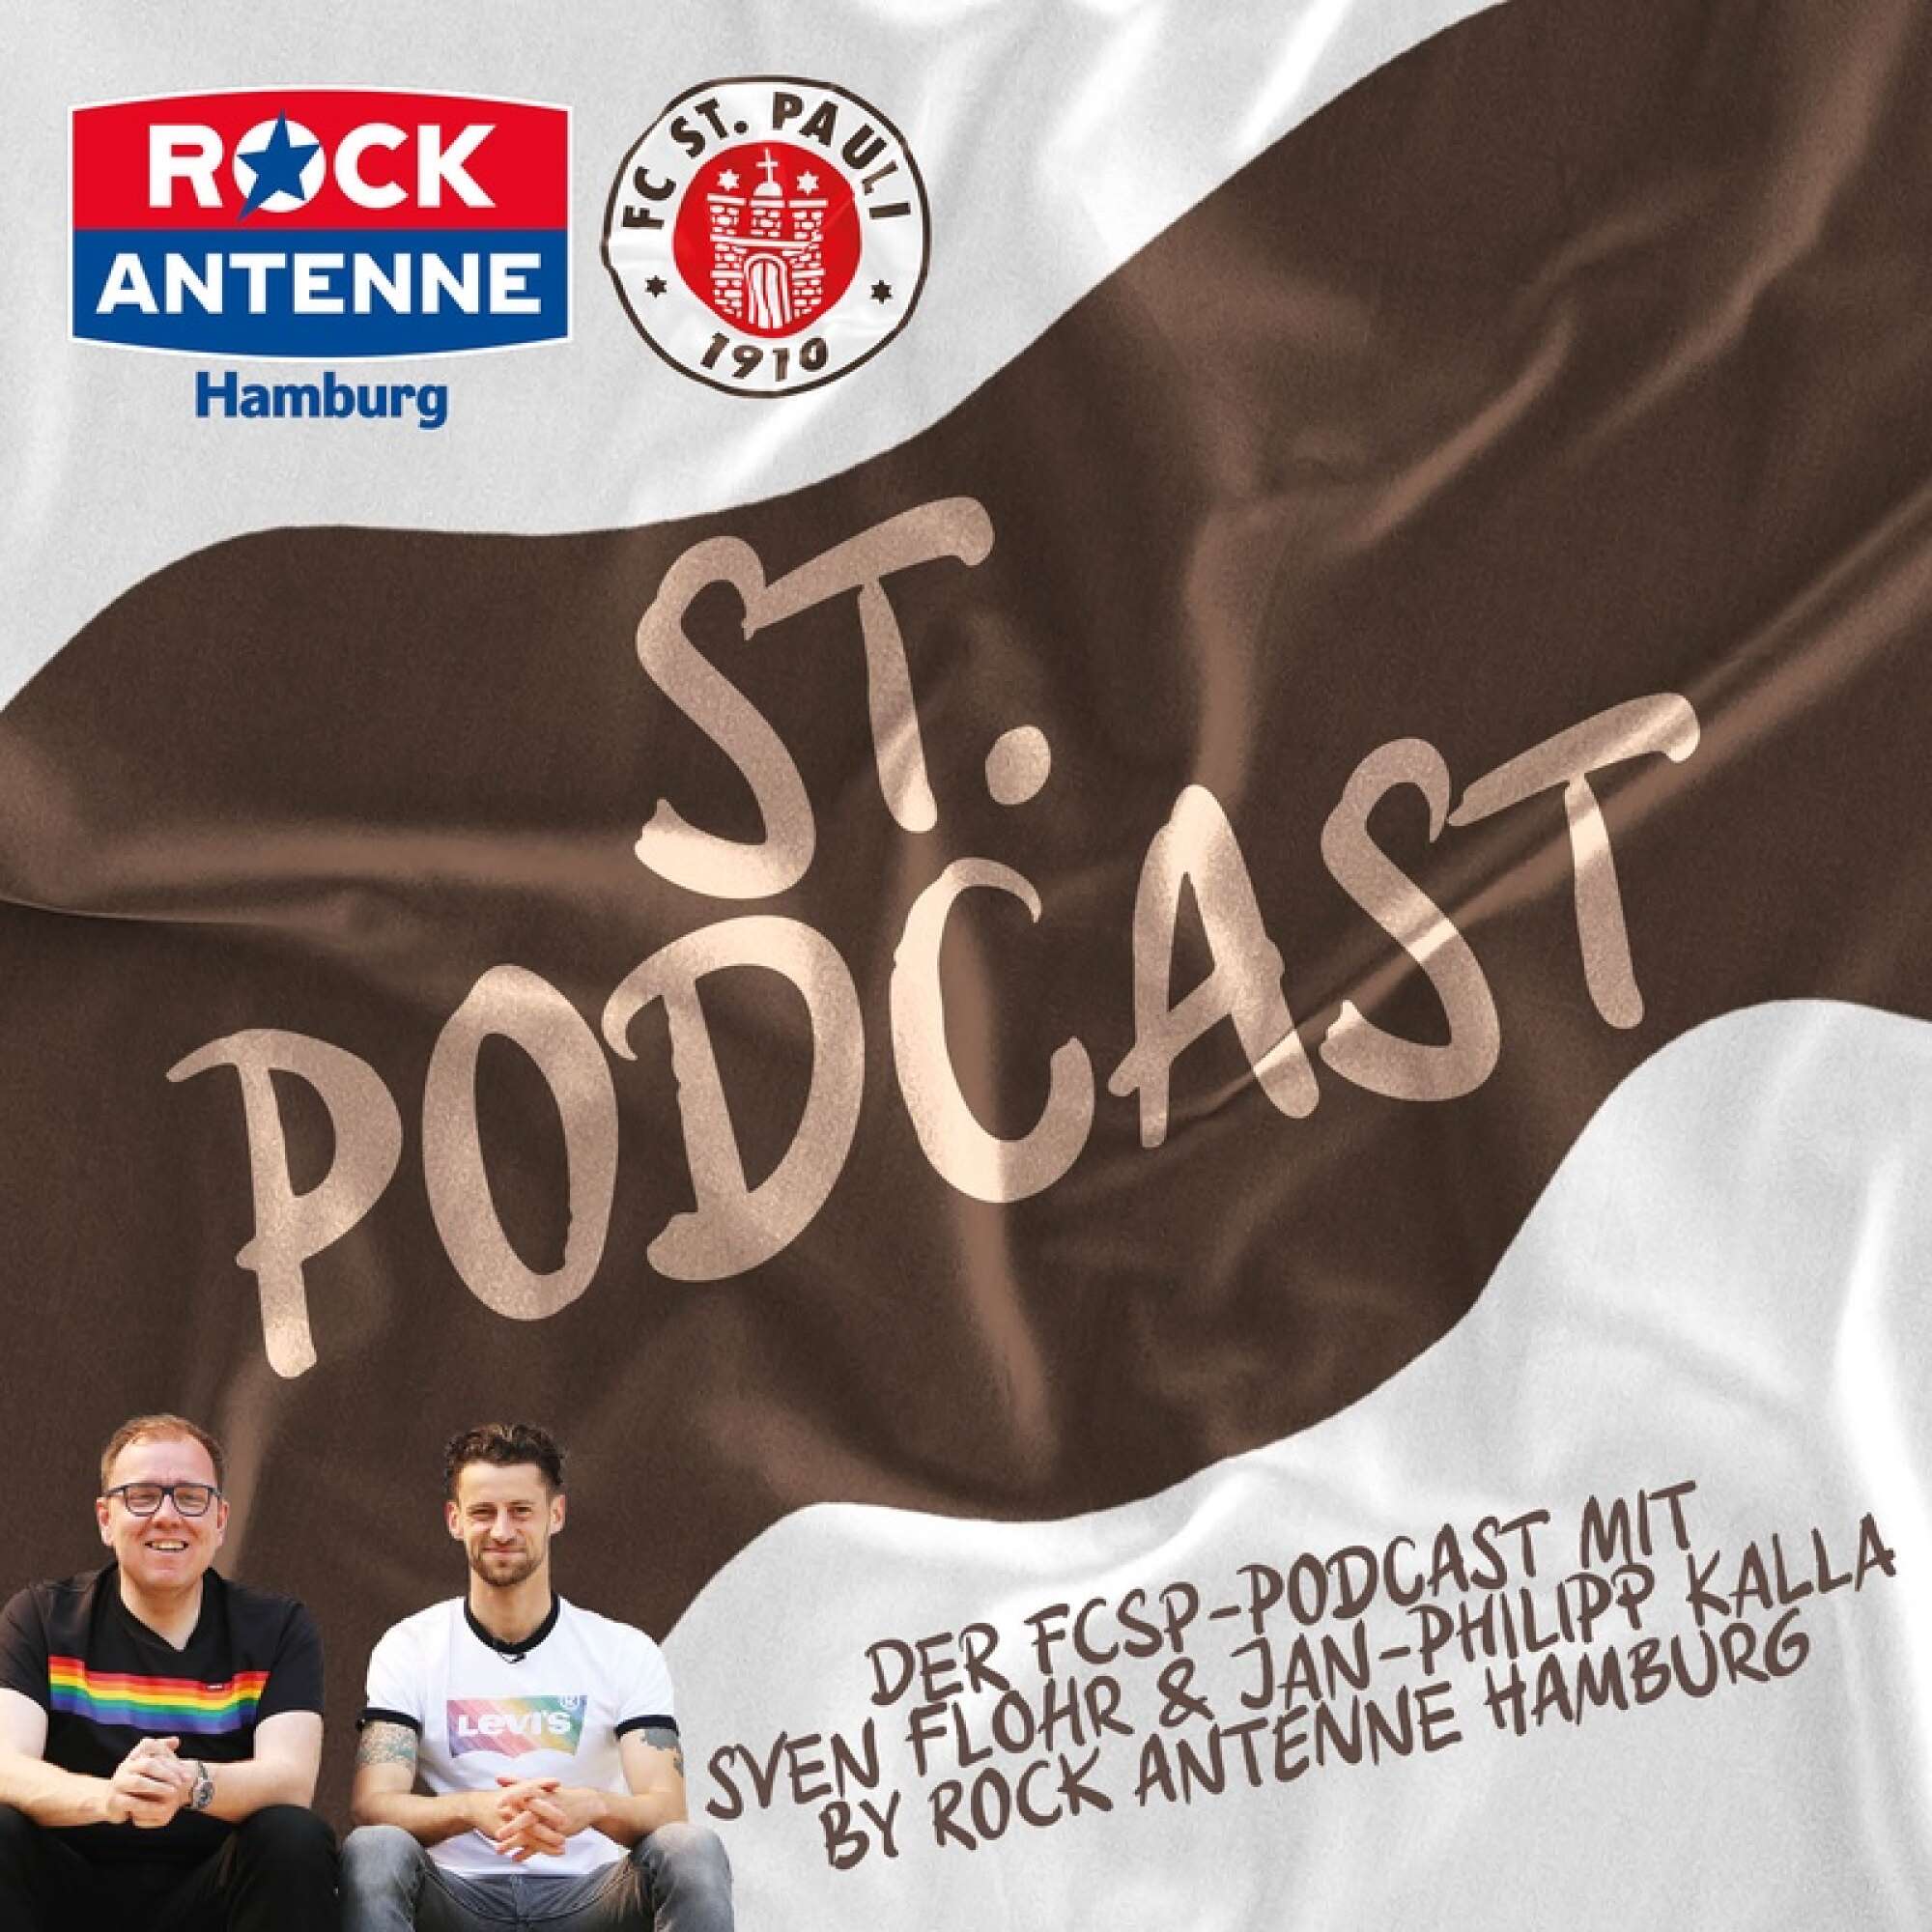 Podcast-Cover "St. Podcast"